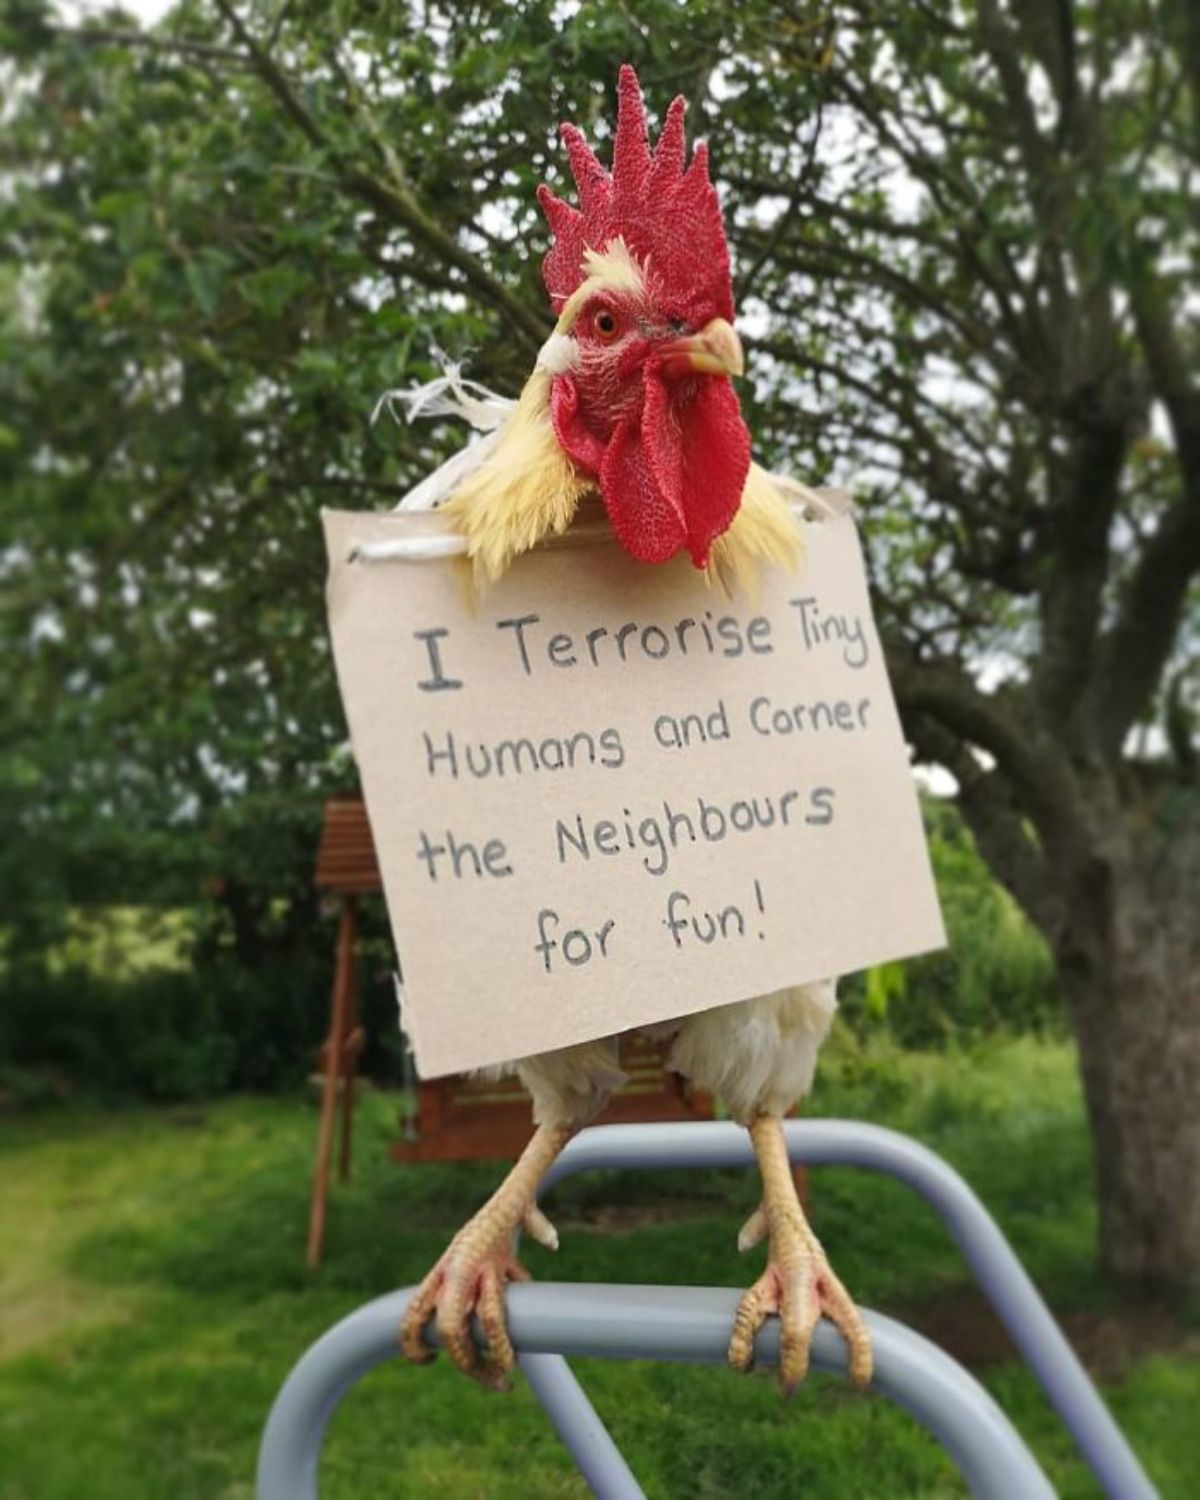 white and red rooster standing on grey metal raining with a note saying "i terrorise tiny humans and corner the neighbours for fun"